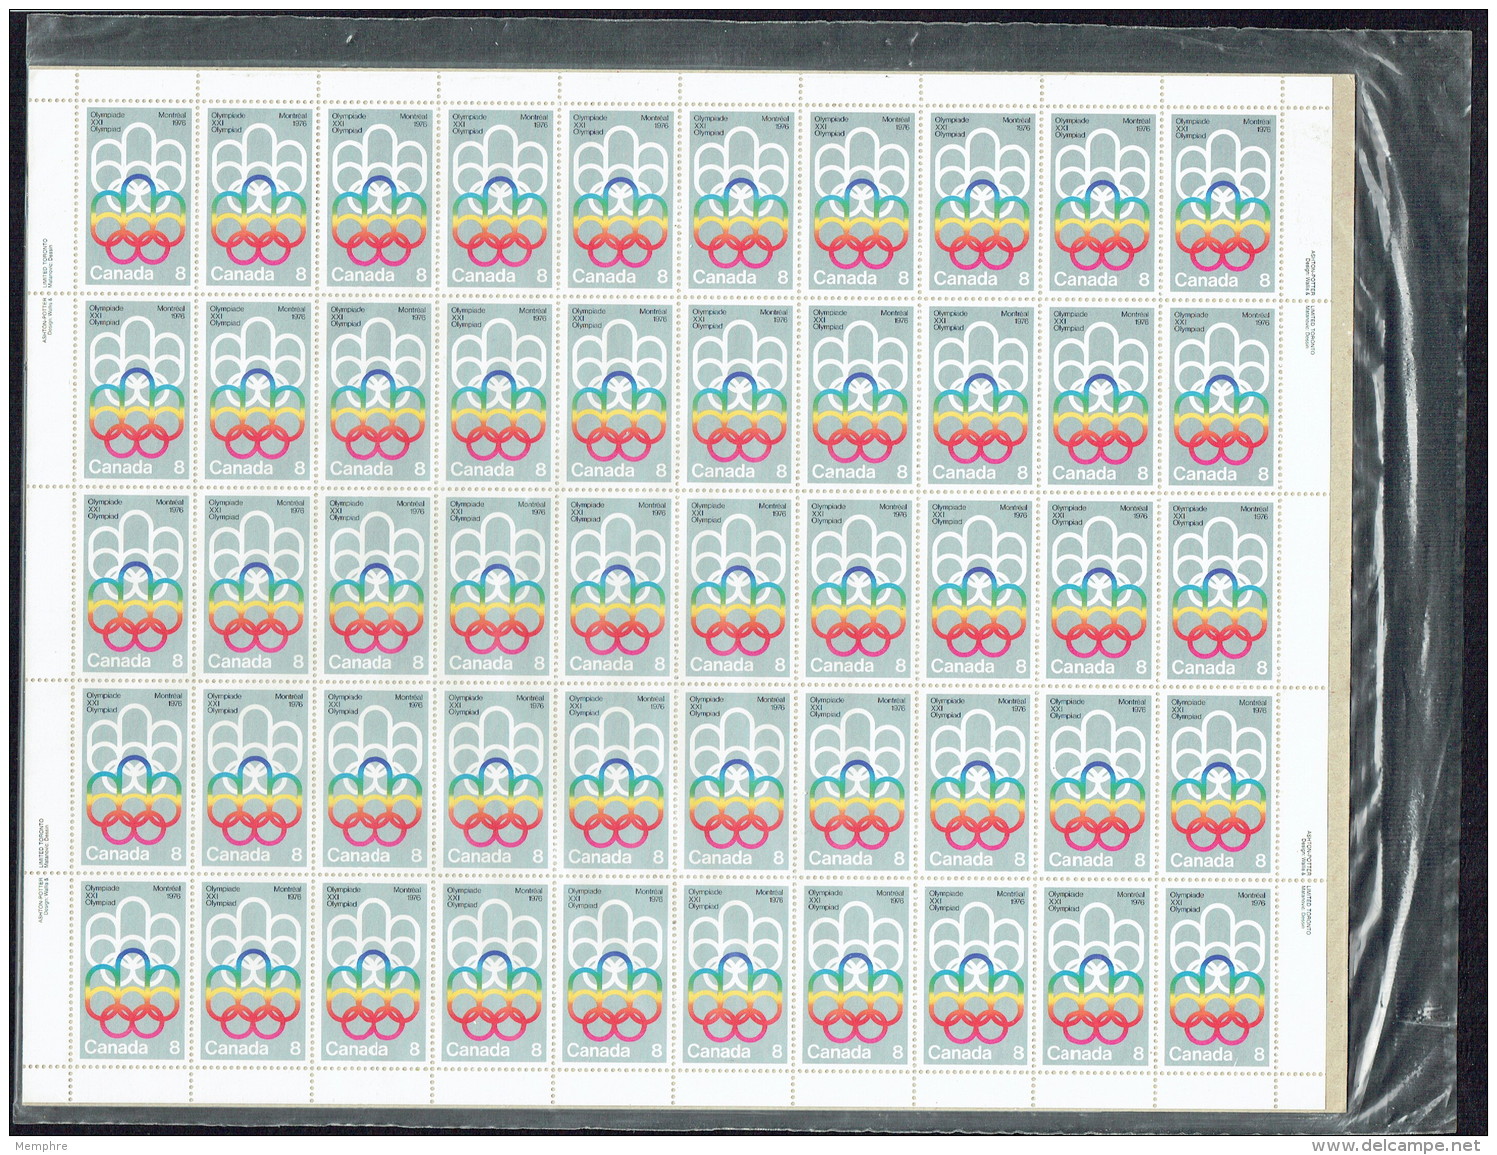 1973  Montreal Olympic Games - Games Symbol  Sc 623-4  Complete Sheets Of 50 In Original Packaging - Fogli Completi